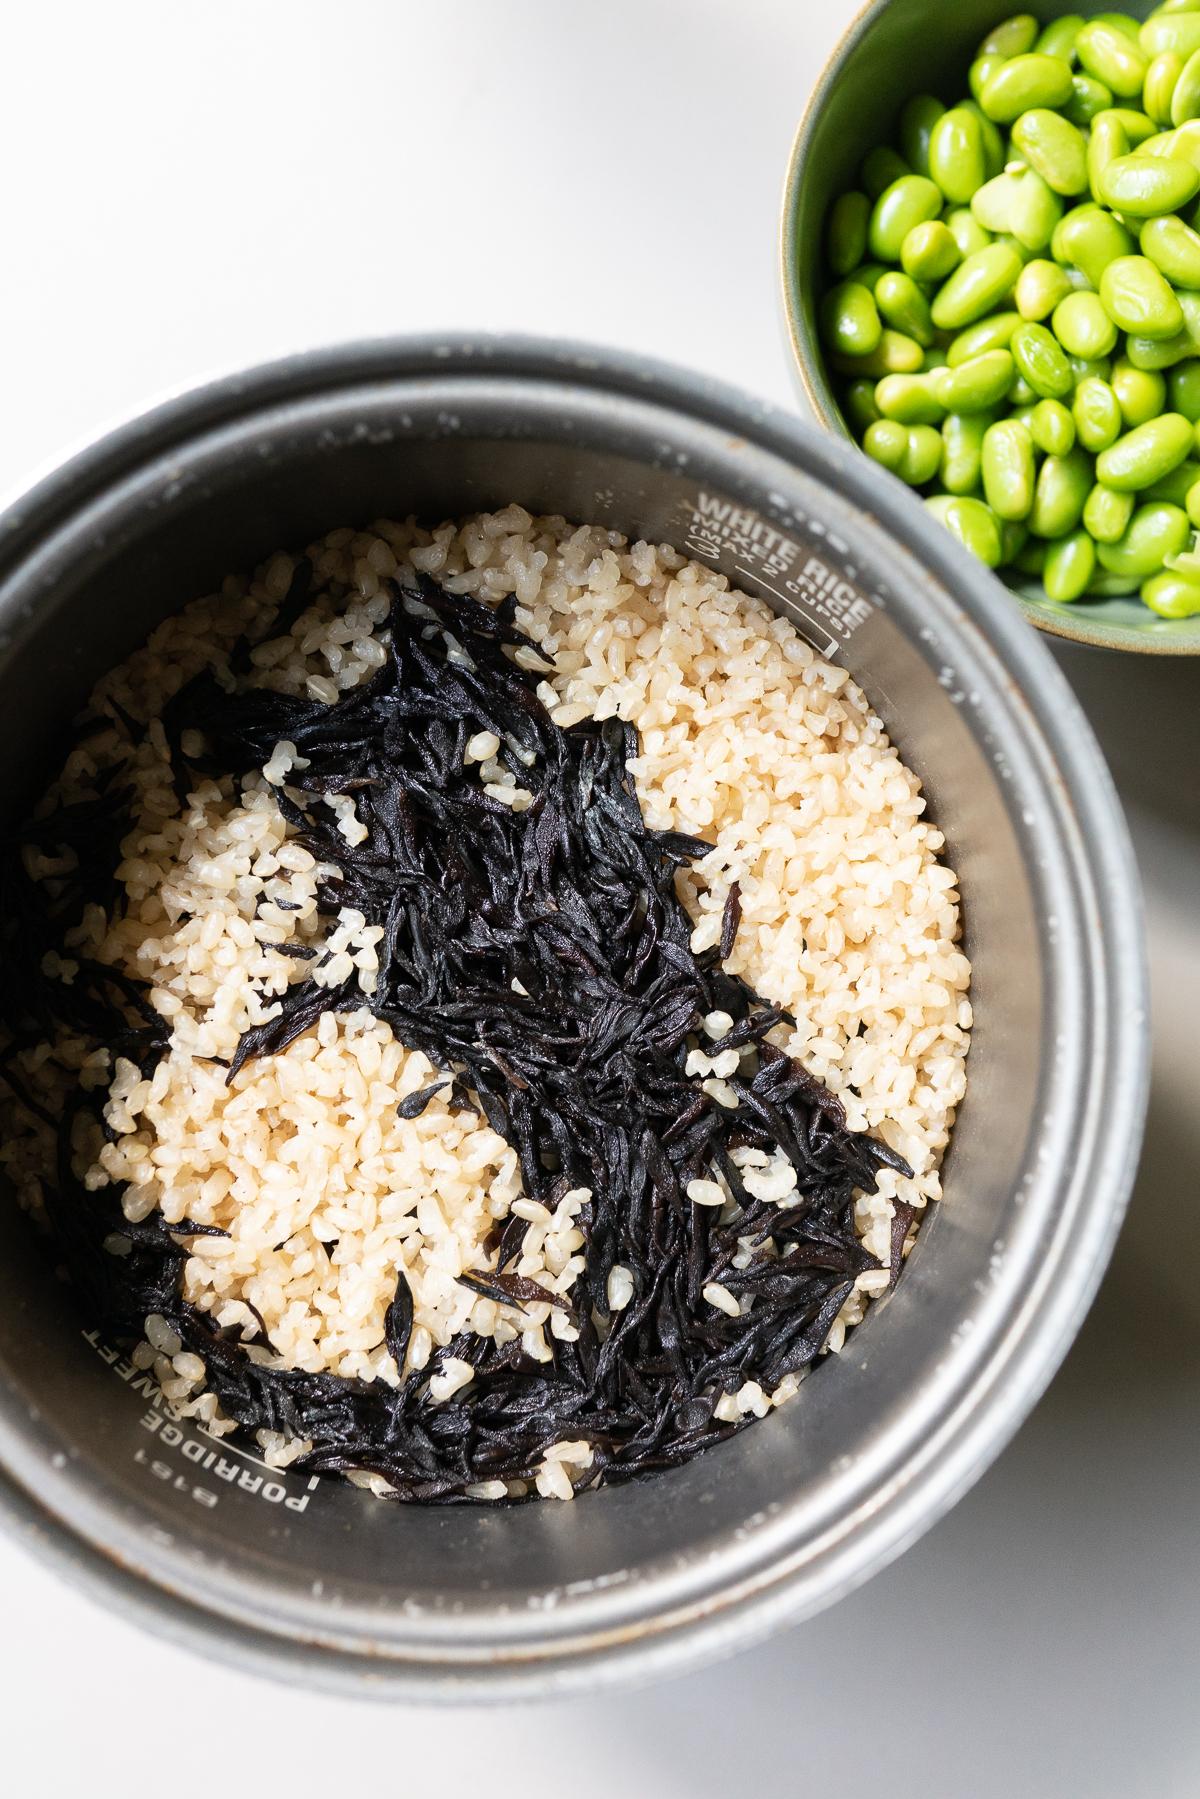 The cooked rice with hijiki in the rice pot